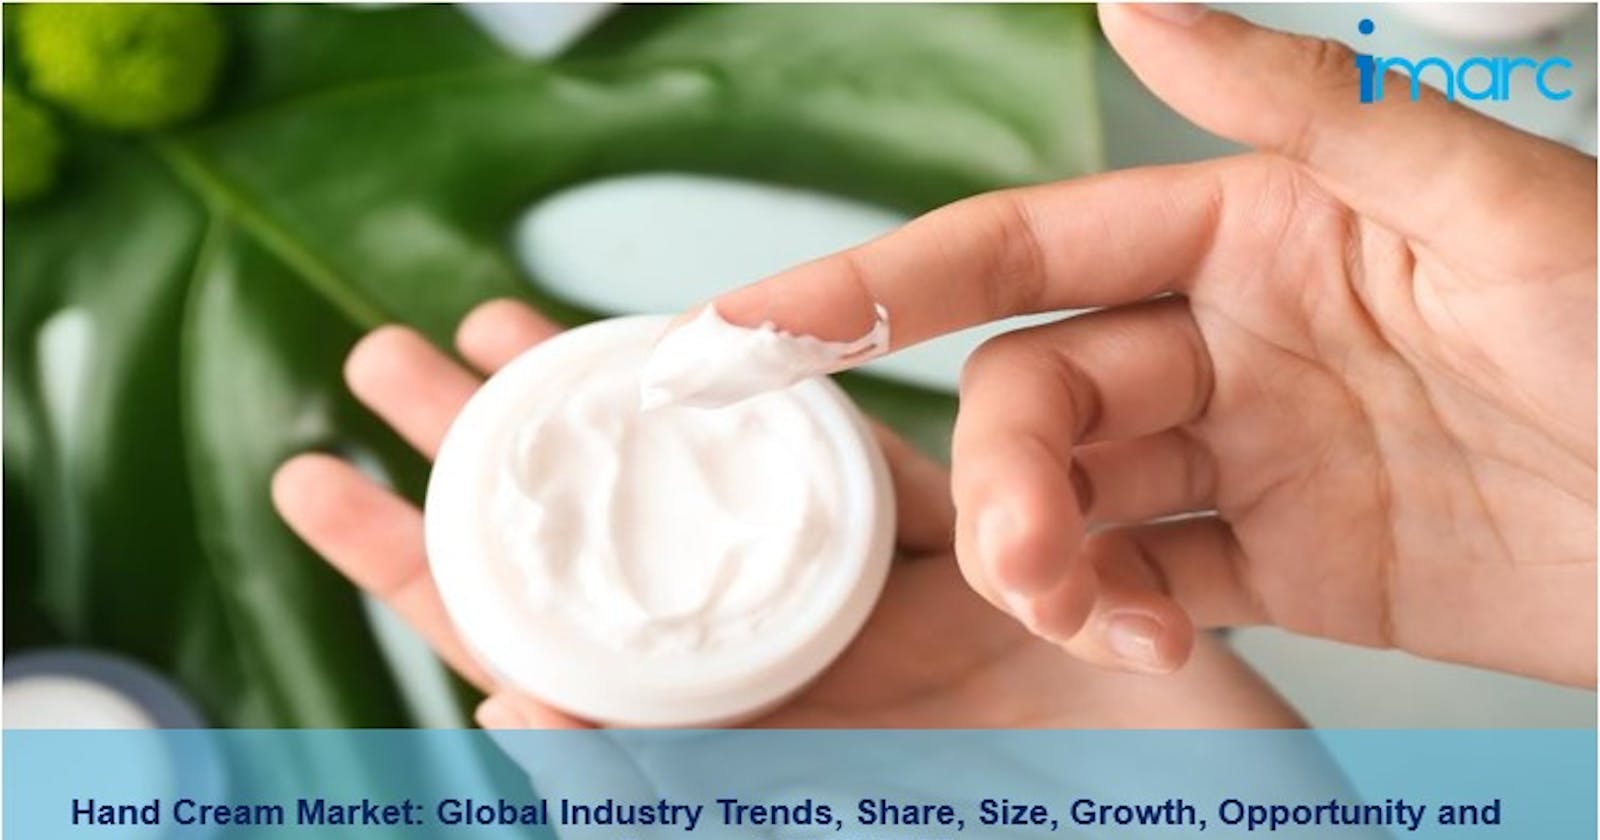 Hand Cream Market 2022, Size, Demand, Scope And Forecast Report 2027